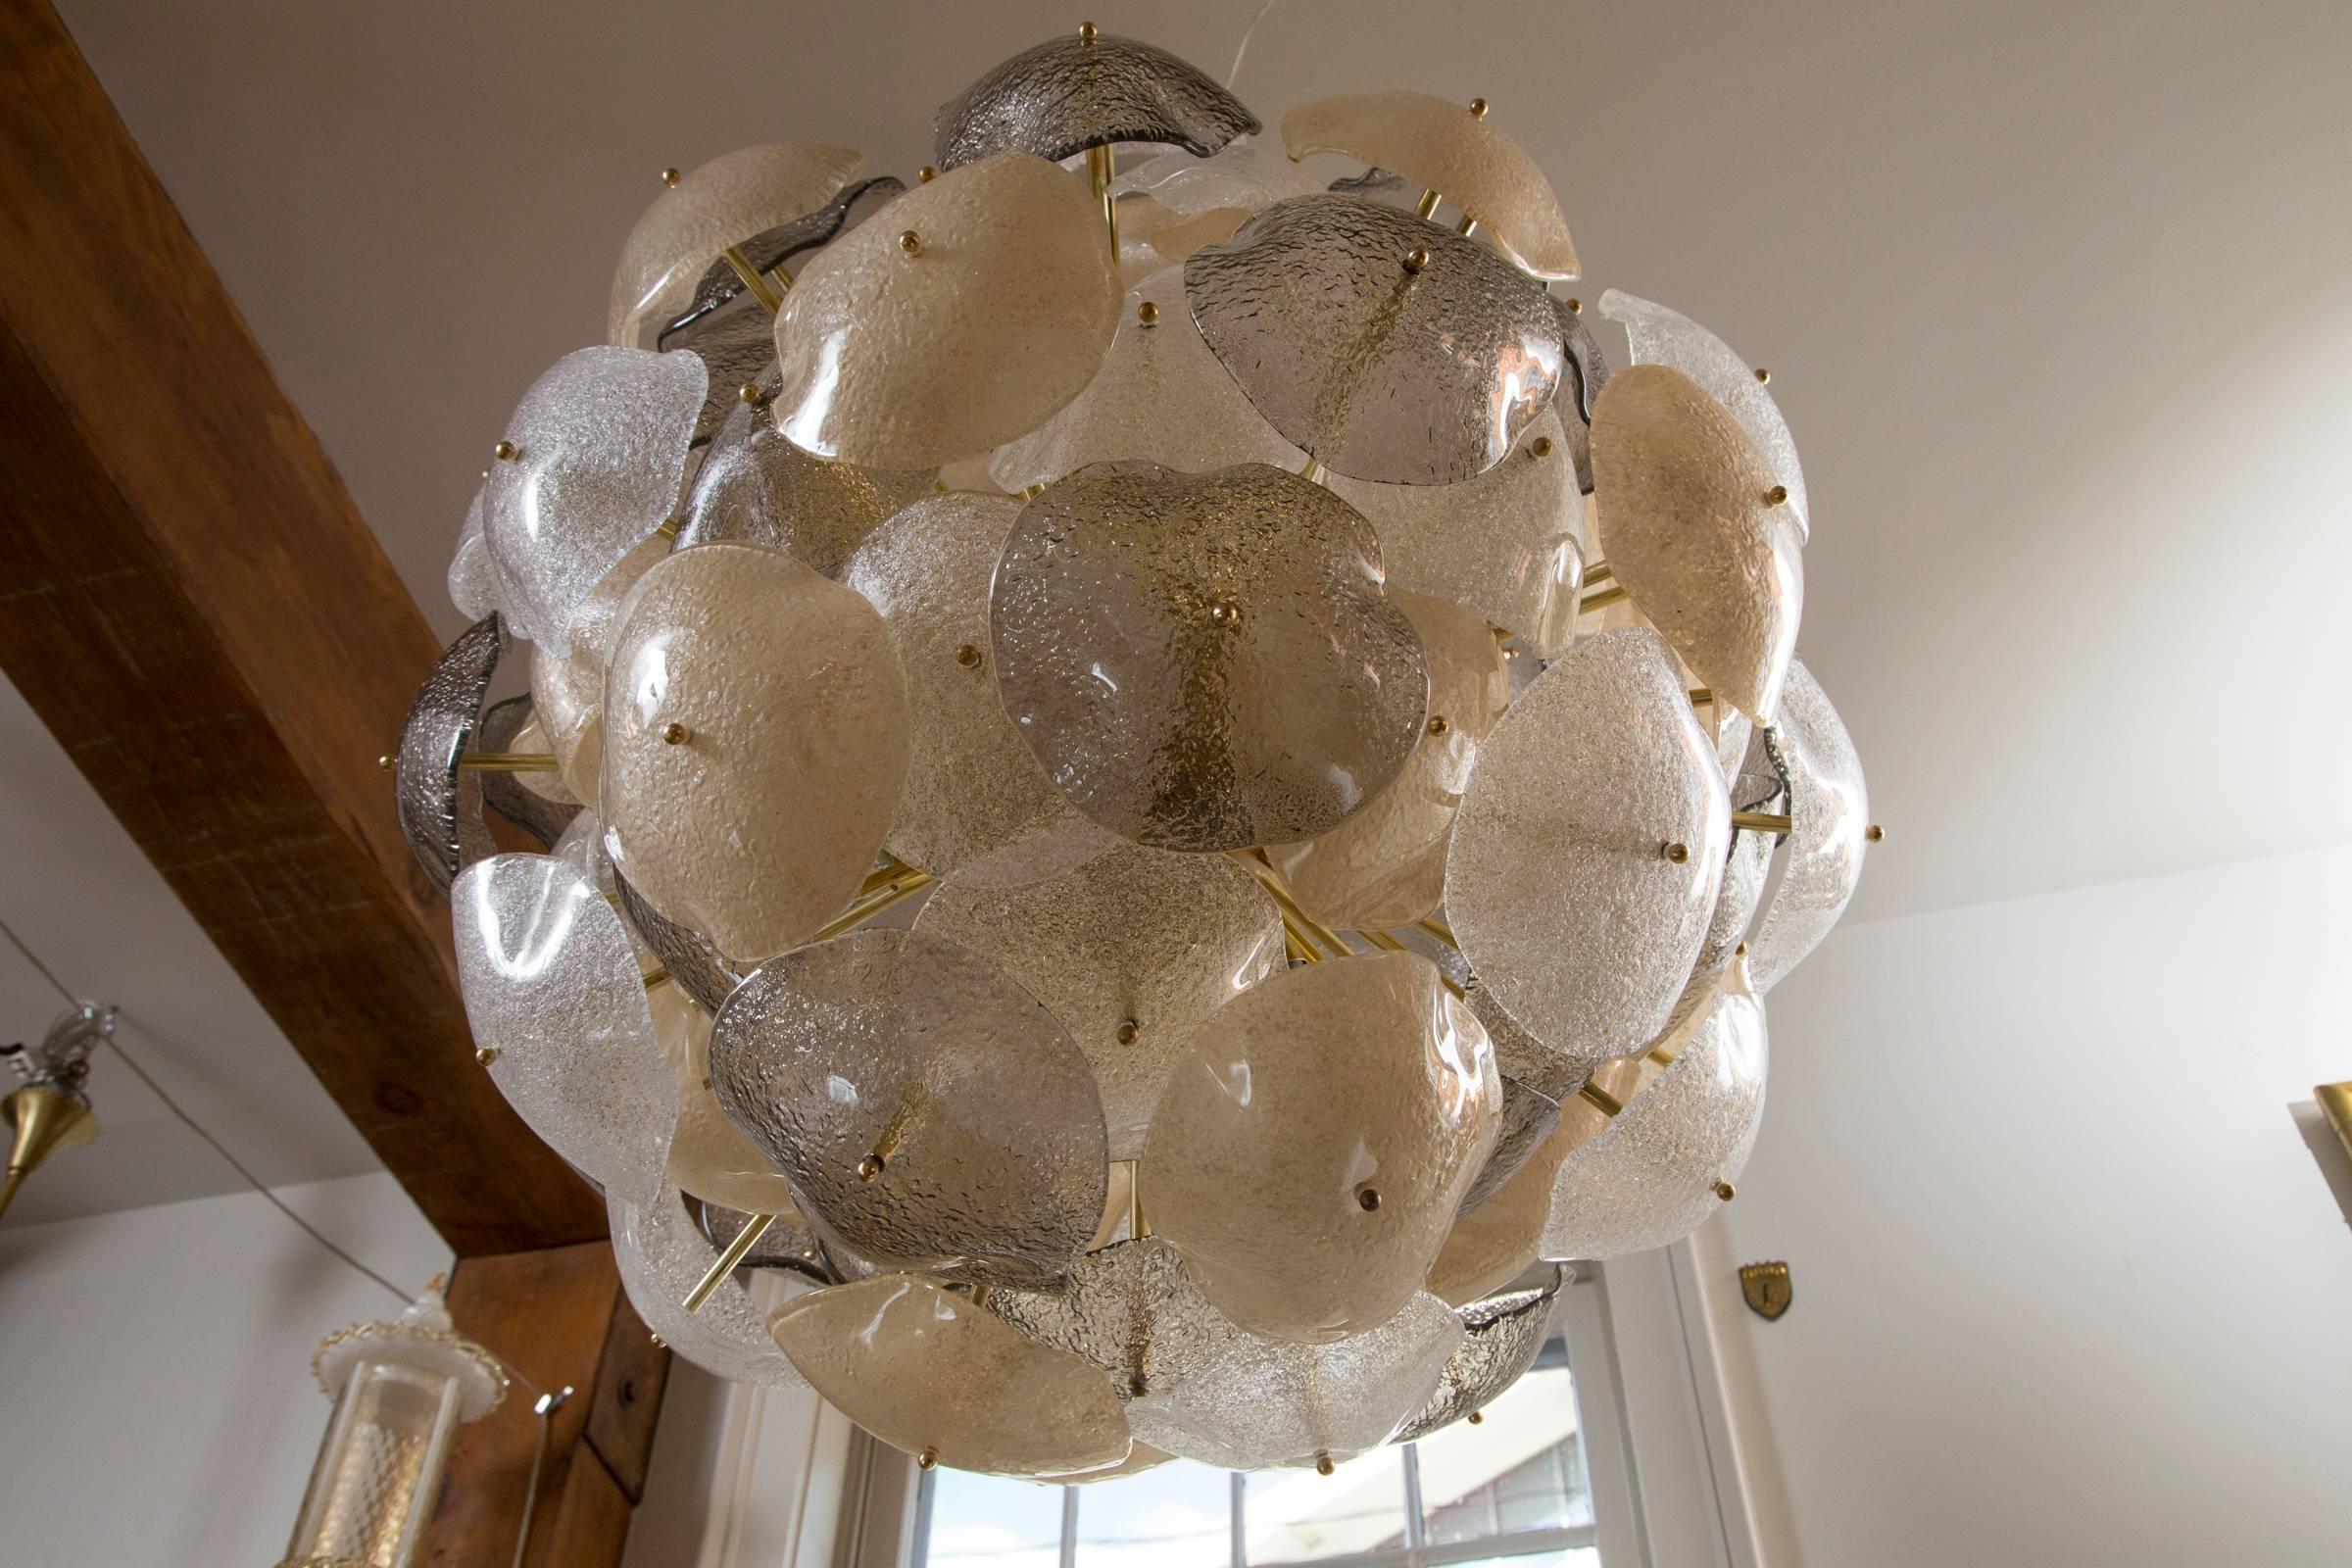  Murano Orb chandelier comprised of  96 blown organic shaped disks in three tones of icy white, warm smoke and cool grey
electrified to illuminate 18 medium base bulbs (only partially illuminated in the photos)

Origin: Venice
Dating: Newly